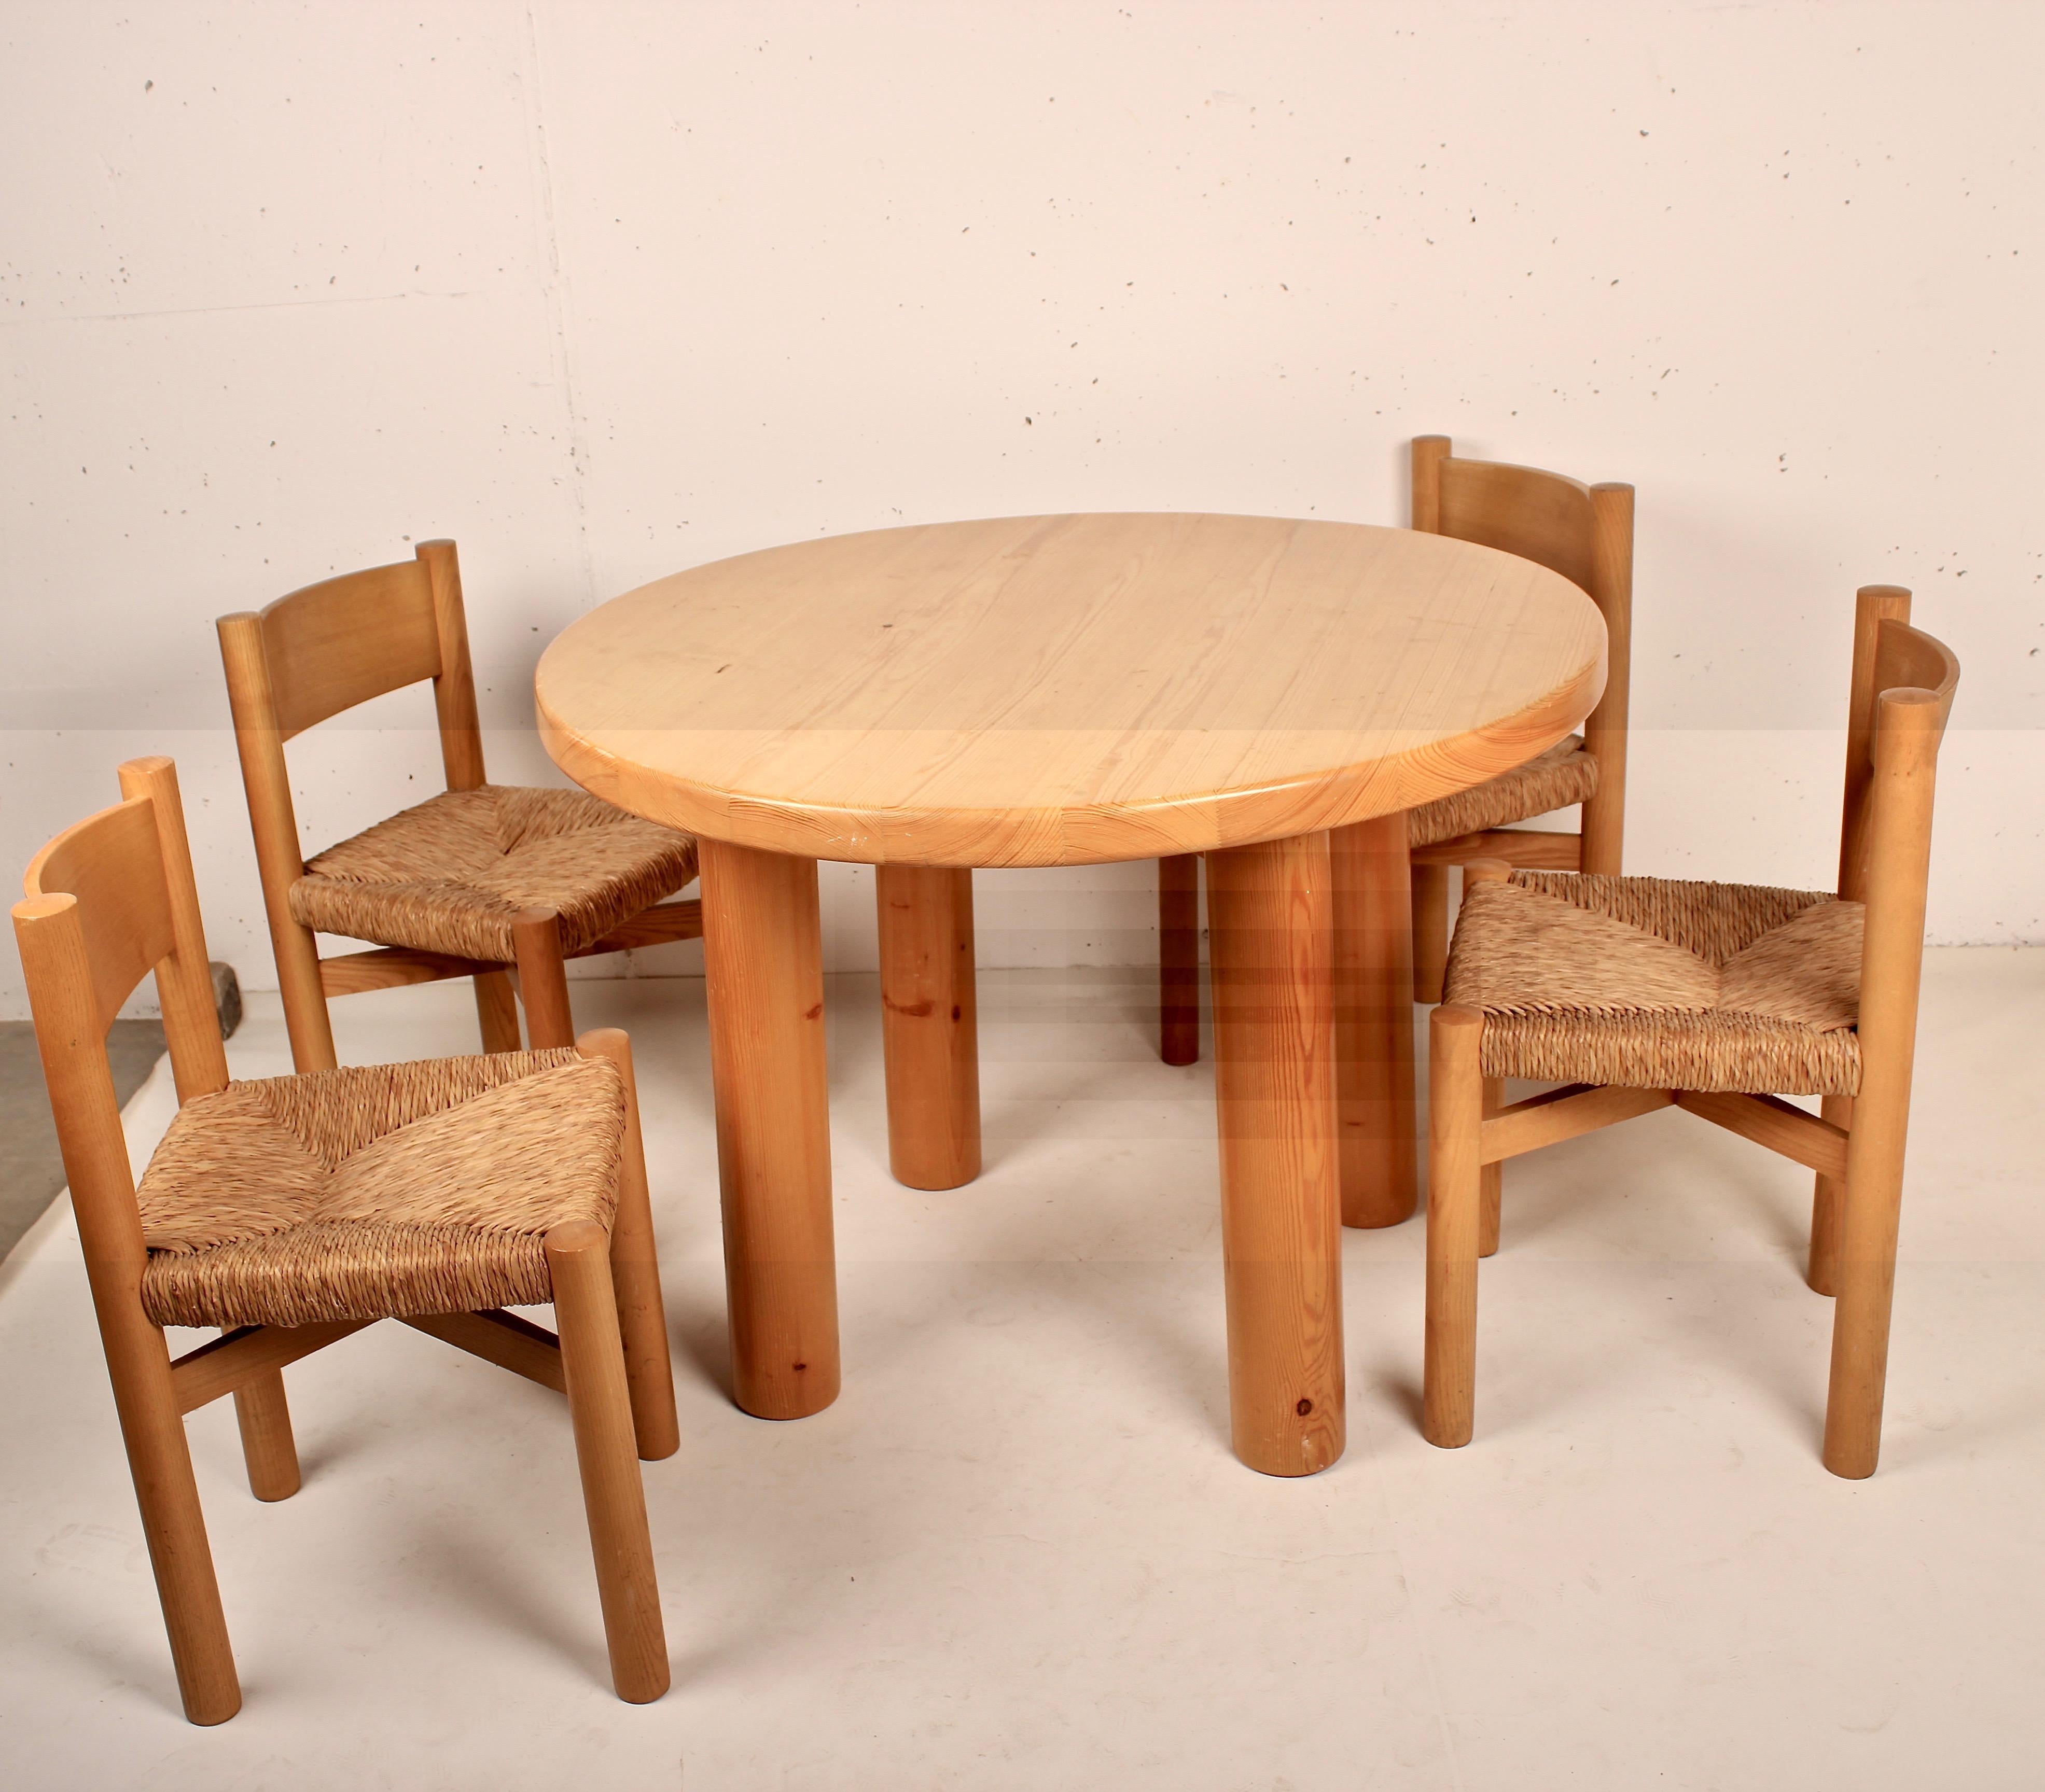 Pine Charlotte Perriand Doron Type Table for Résidence Les Allues in Méribel, 1971